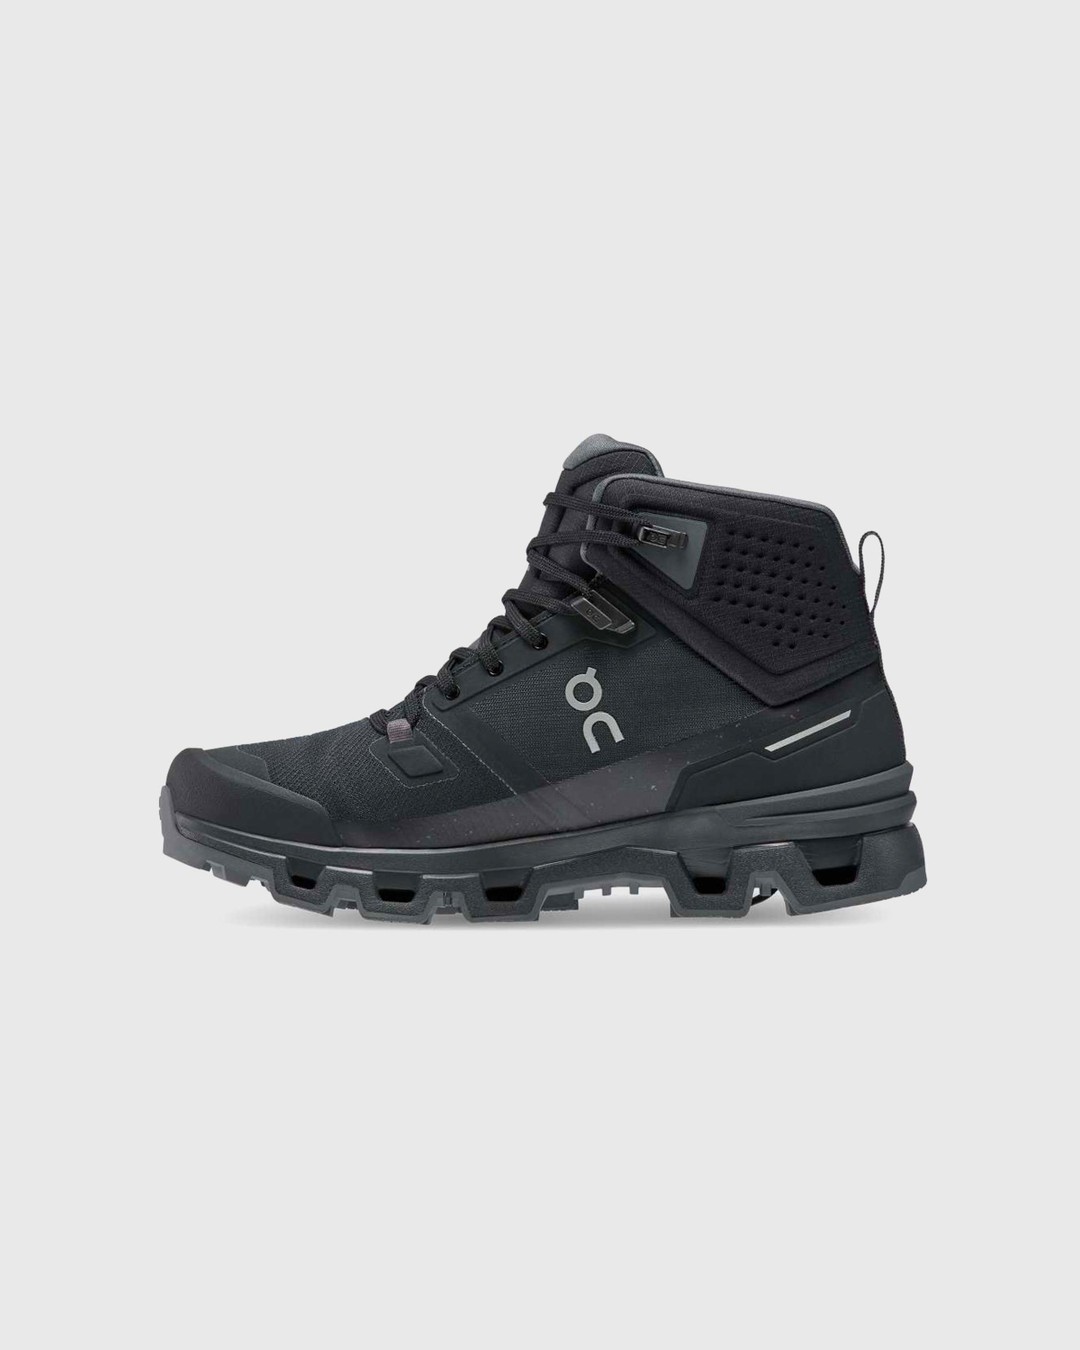 On – Cloudrock 2 Waterproof Black/Eclipse - Hiking Boots - Black - Image 2